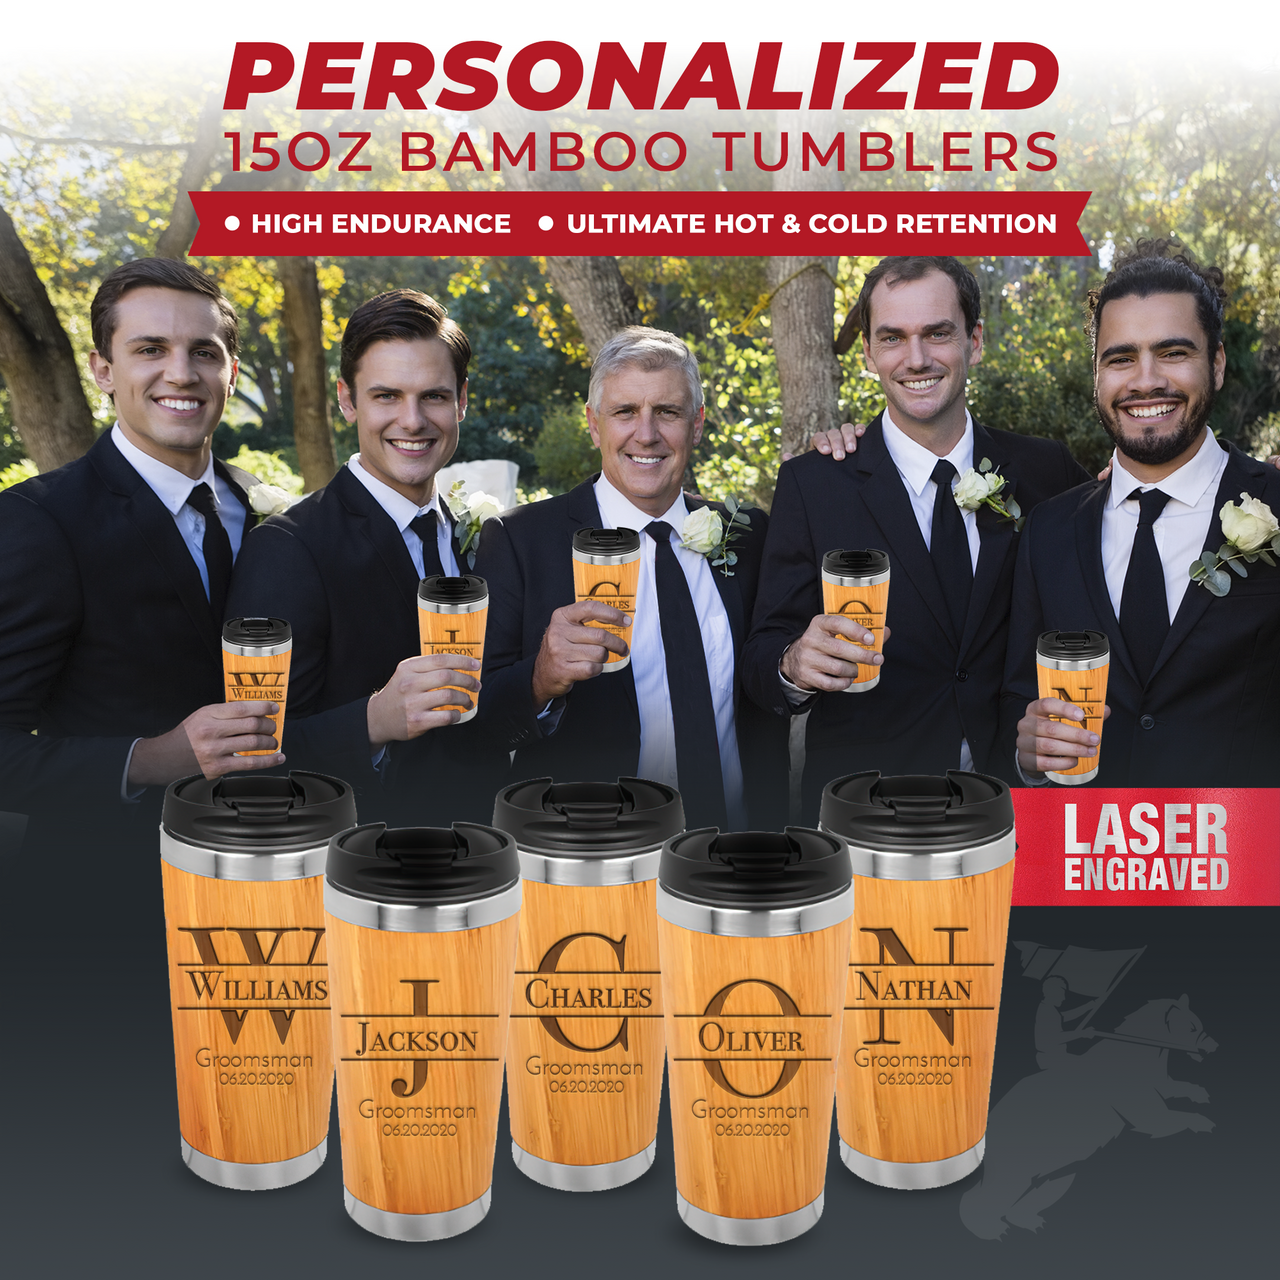 Personalized Groomsmen Proposal Gifts tumblers - Perfect for Your Best Man